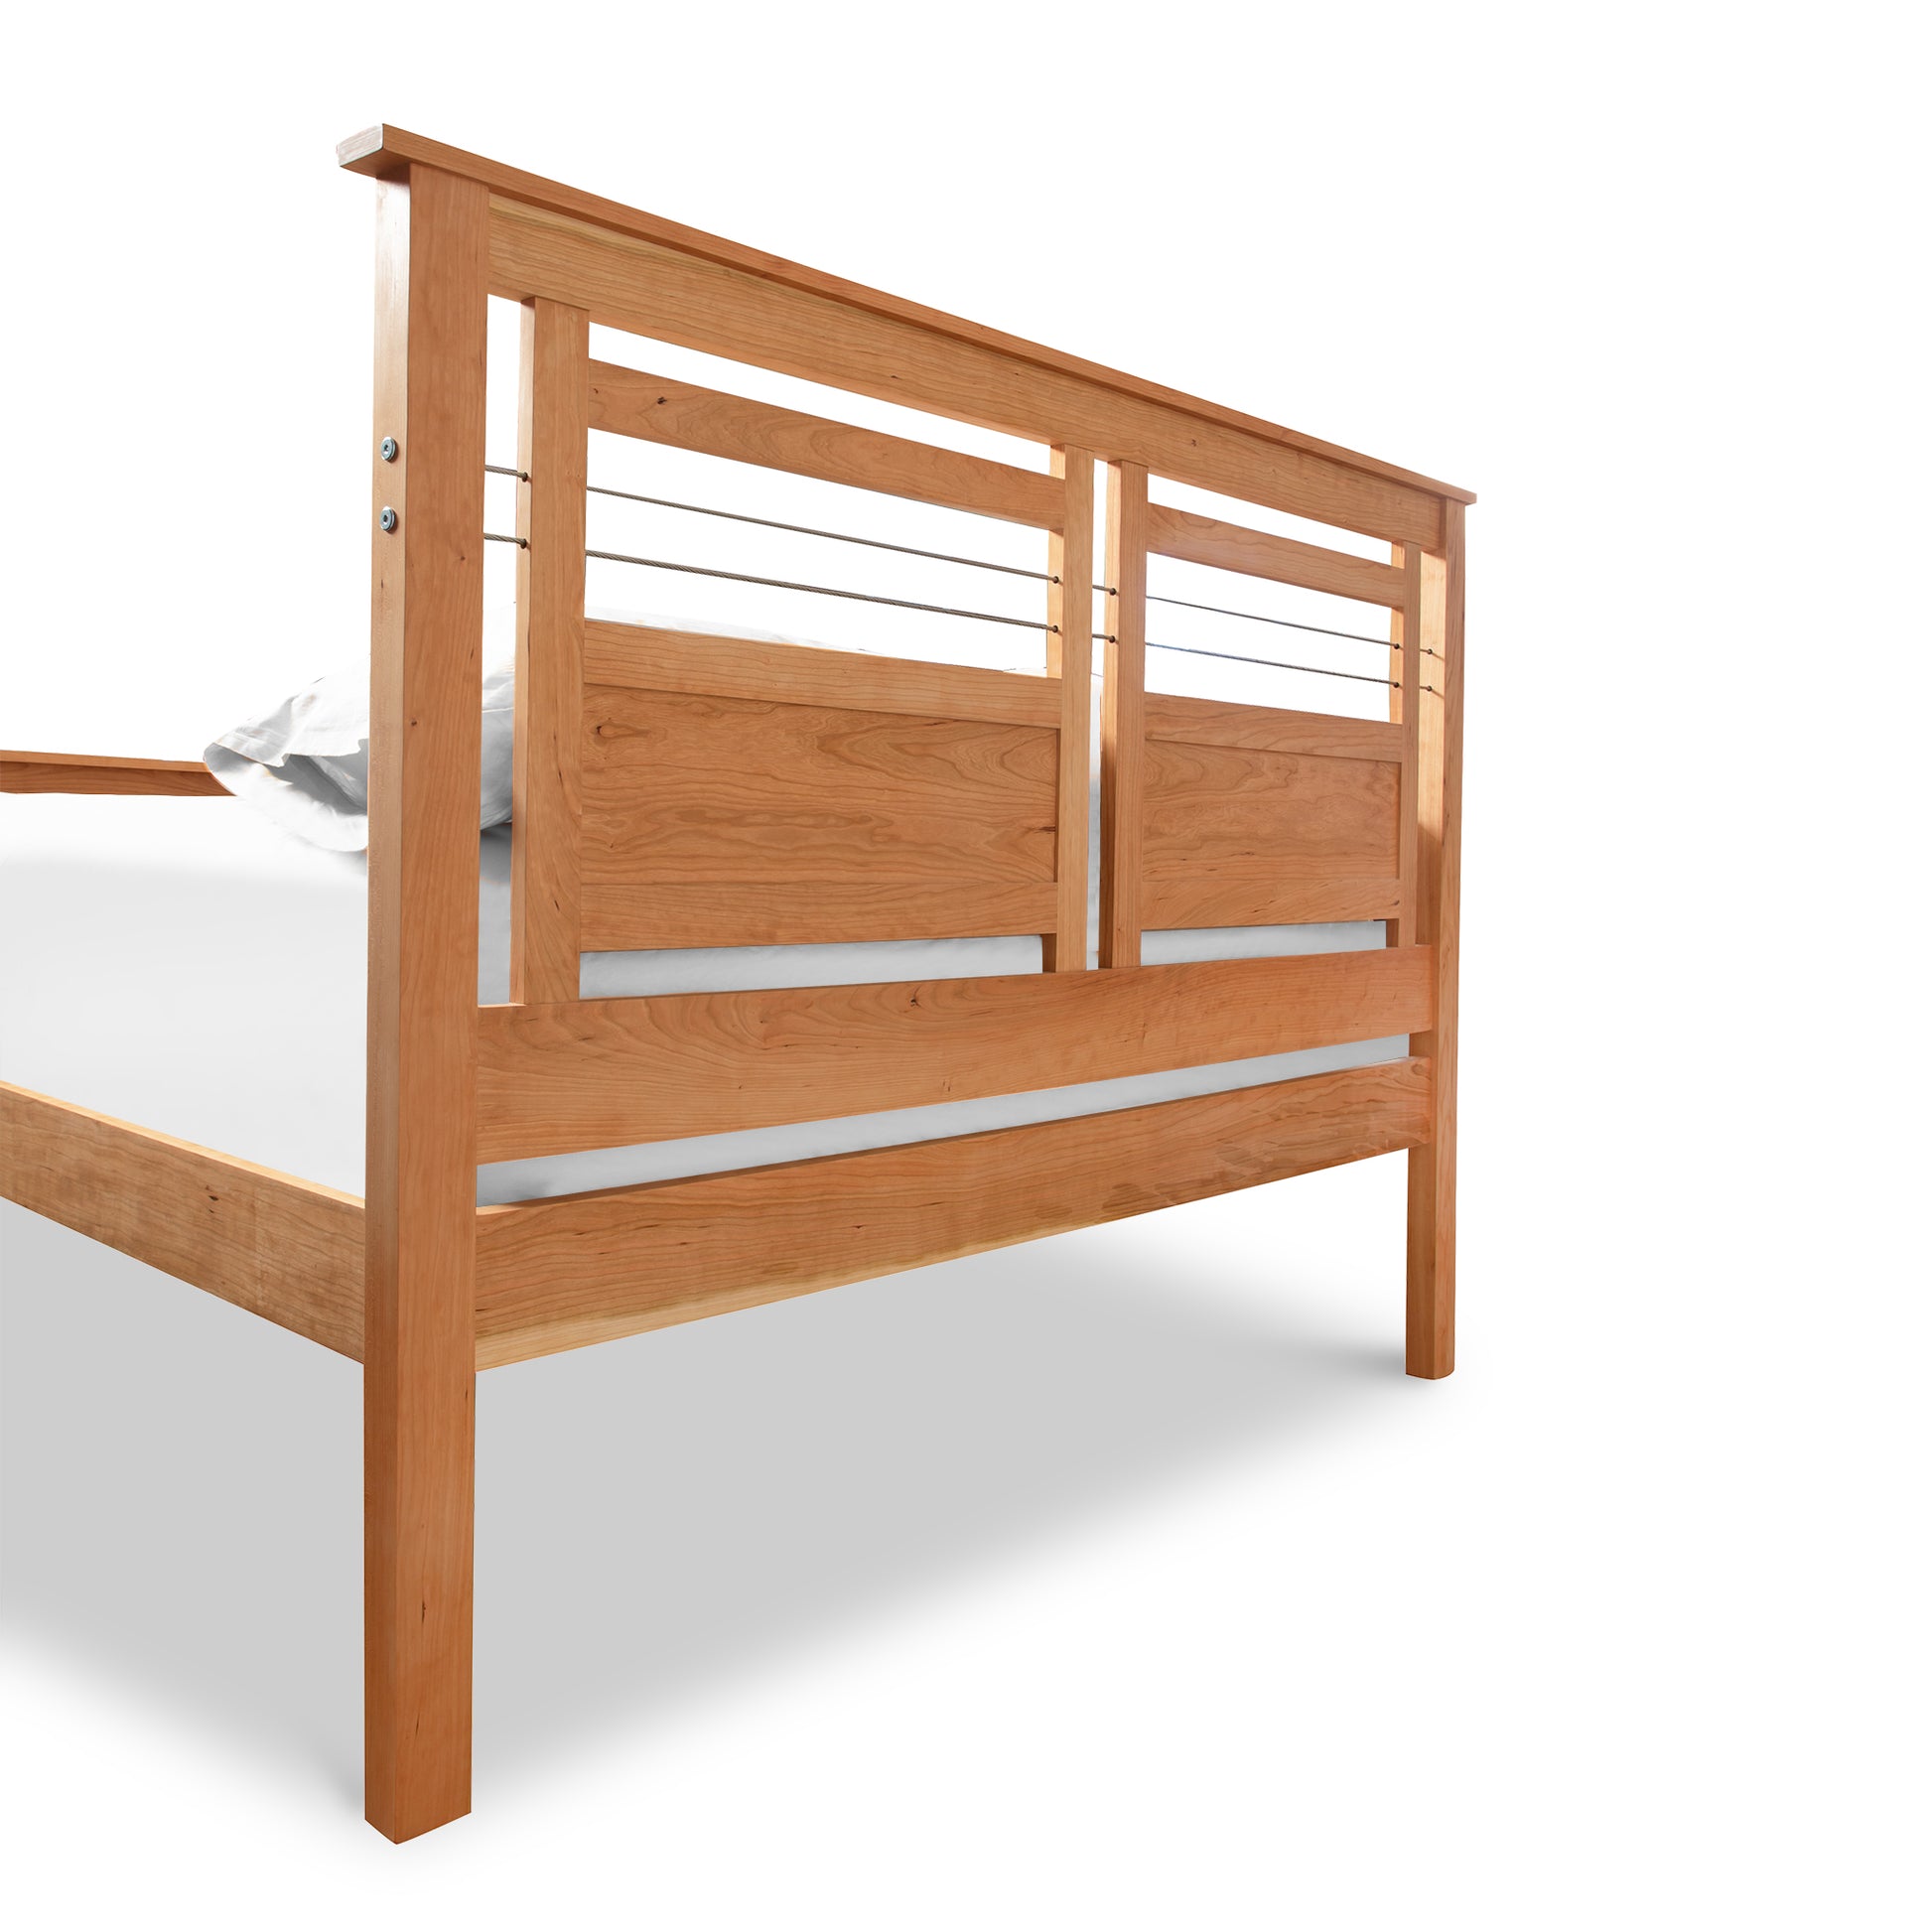 A Vermont Furniture Designs Contemporary Cable Bed frame with a slatted headboard, partially dressed with a single crumpled white pillowcase on the right corner, isolated against a white background.